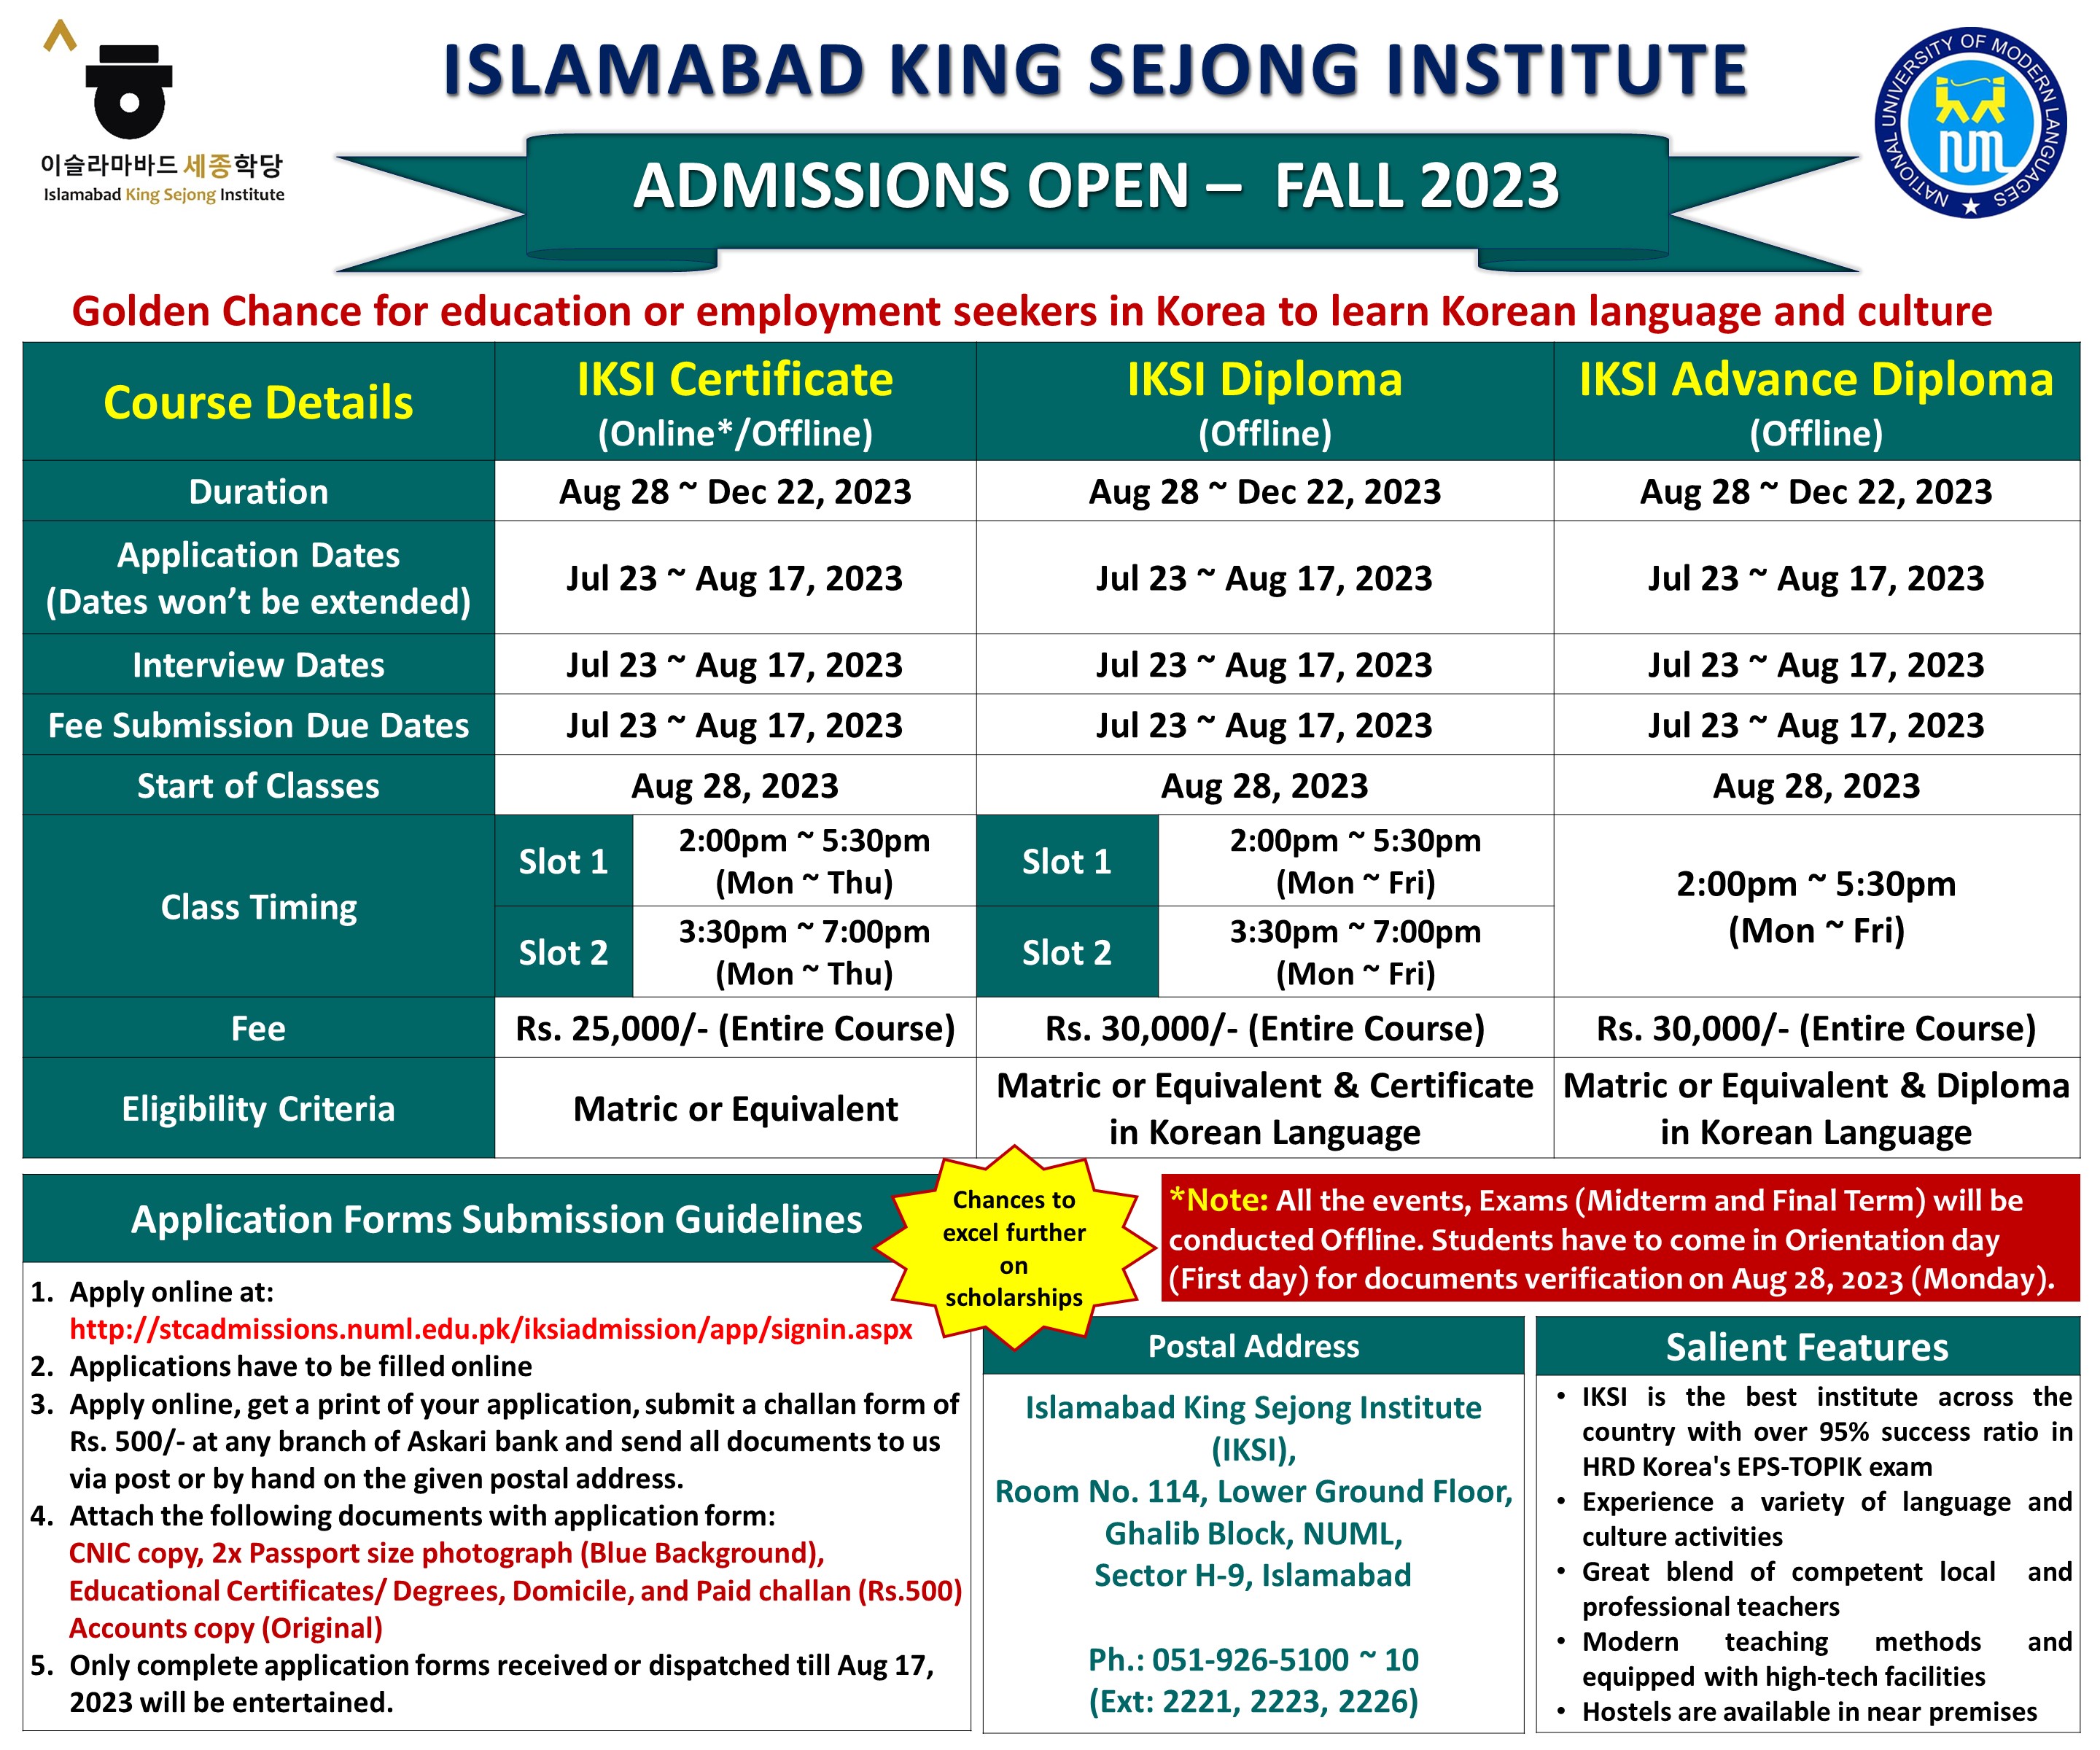 ISLAMABAD KING SEJONG INSTITUTE - KOREAN LANGUAGE - ADMISSIONS OPEN FALL 2023